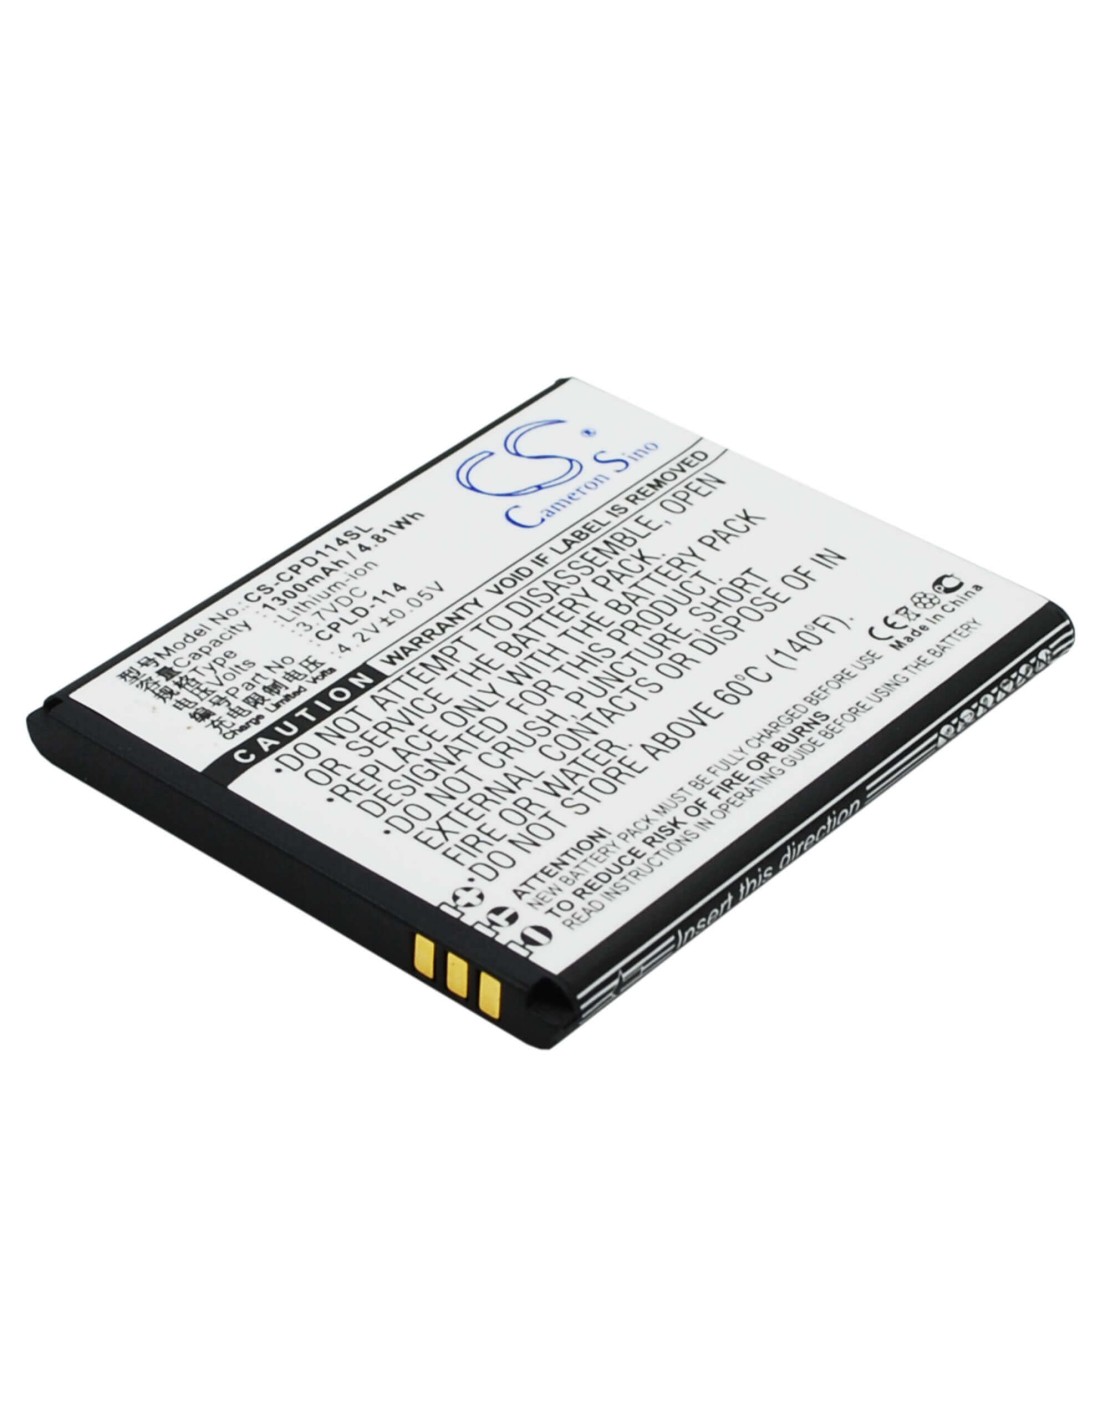 Battery for Coolpad 8079 3.7V, 1300mAh - 4.81Wh